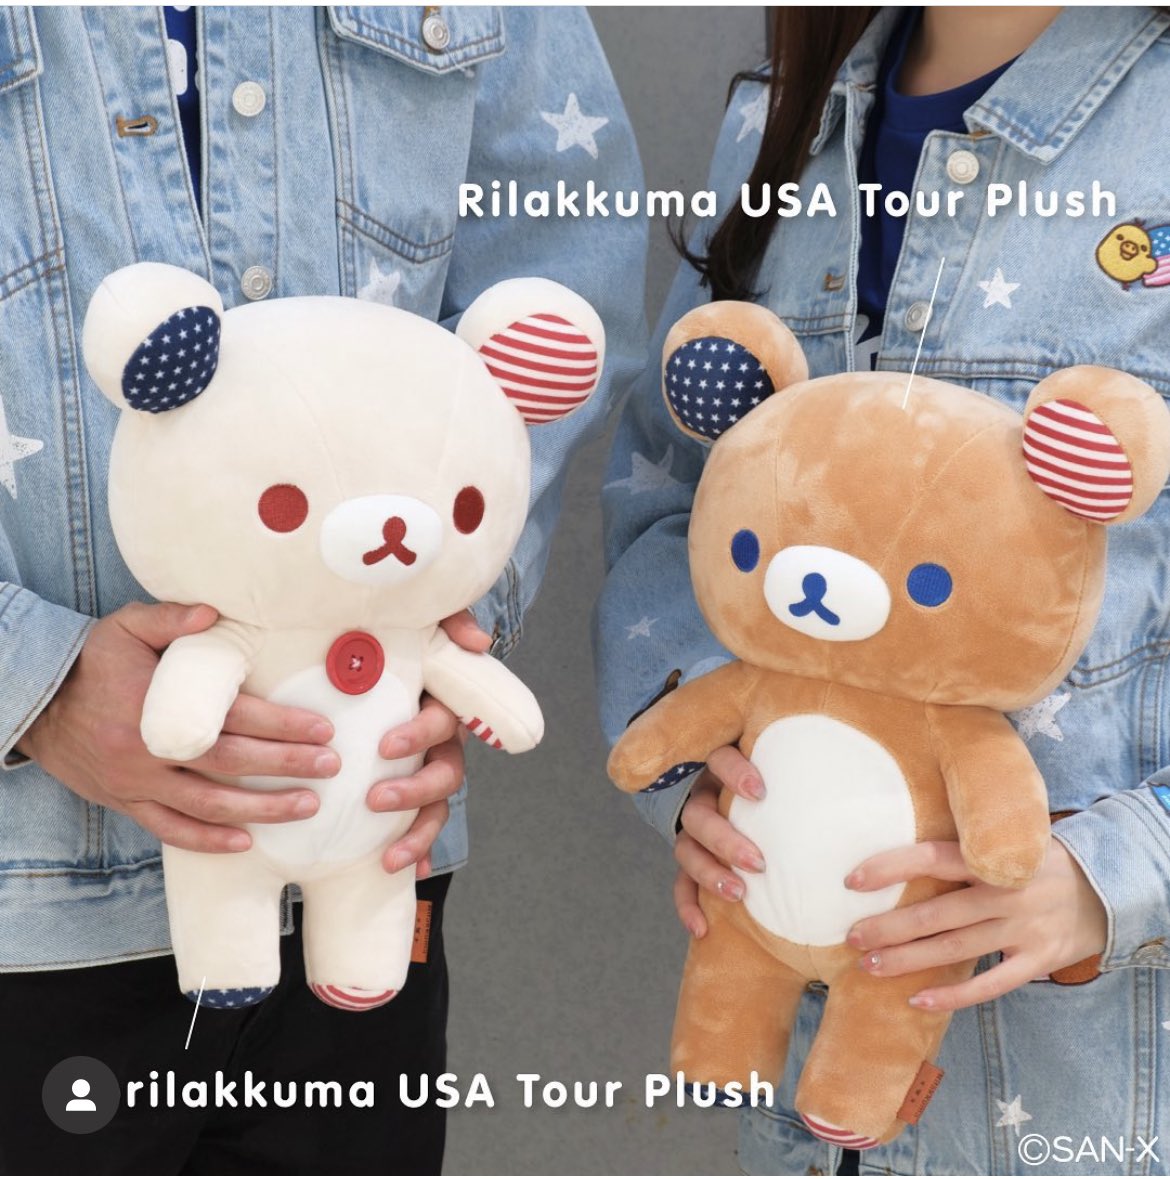 Girls only want one thing and it’s the Rilakkuma US Tour exclusive and numbered plush 
#rilakkuma_usatour